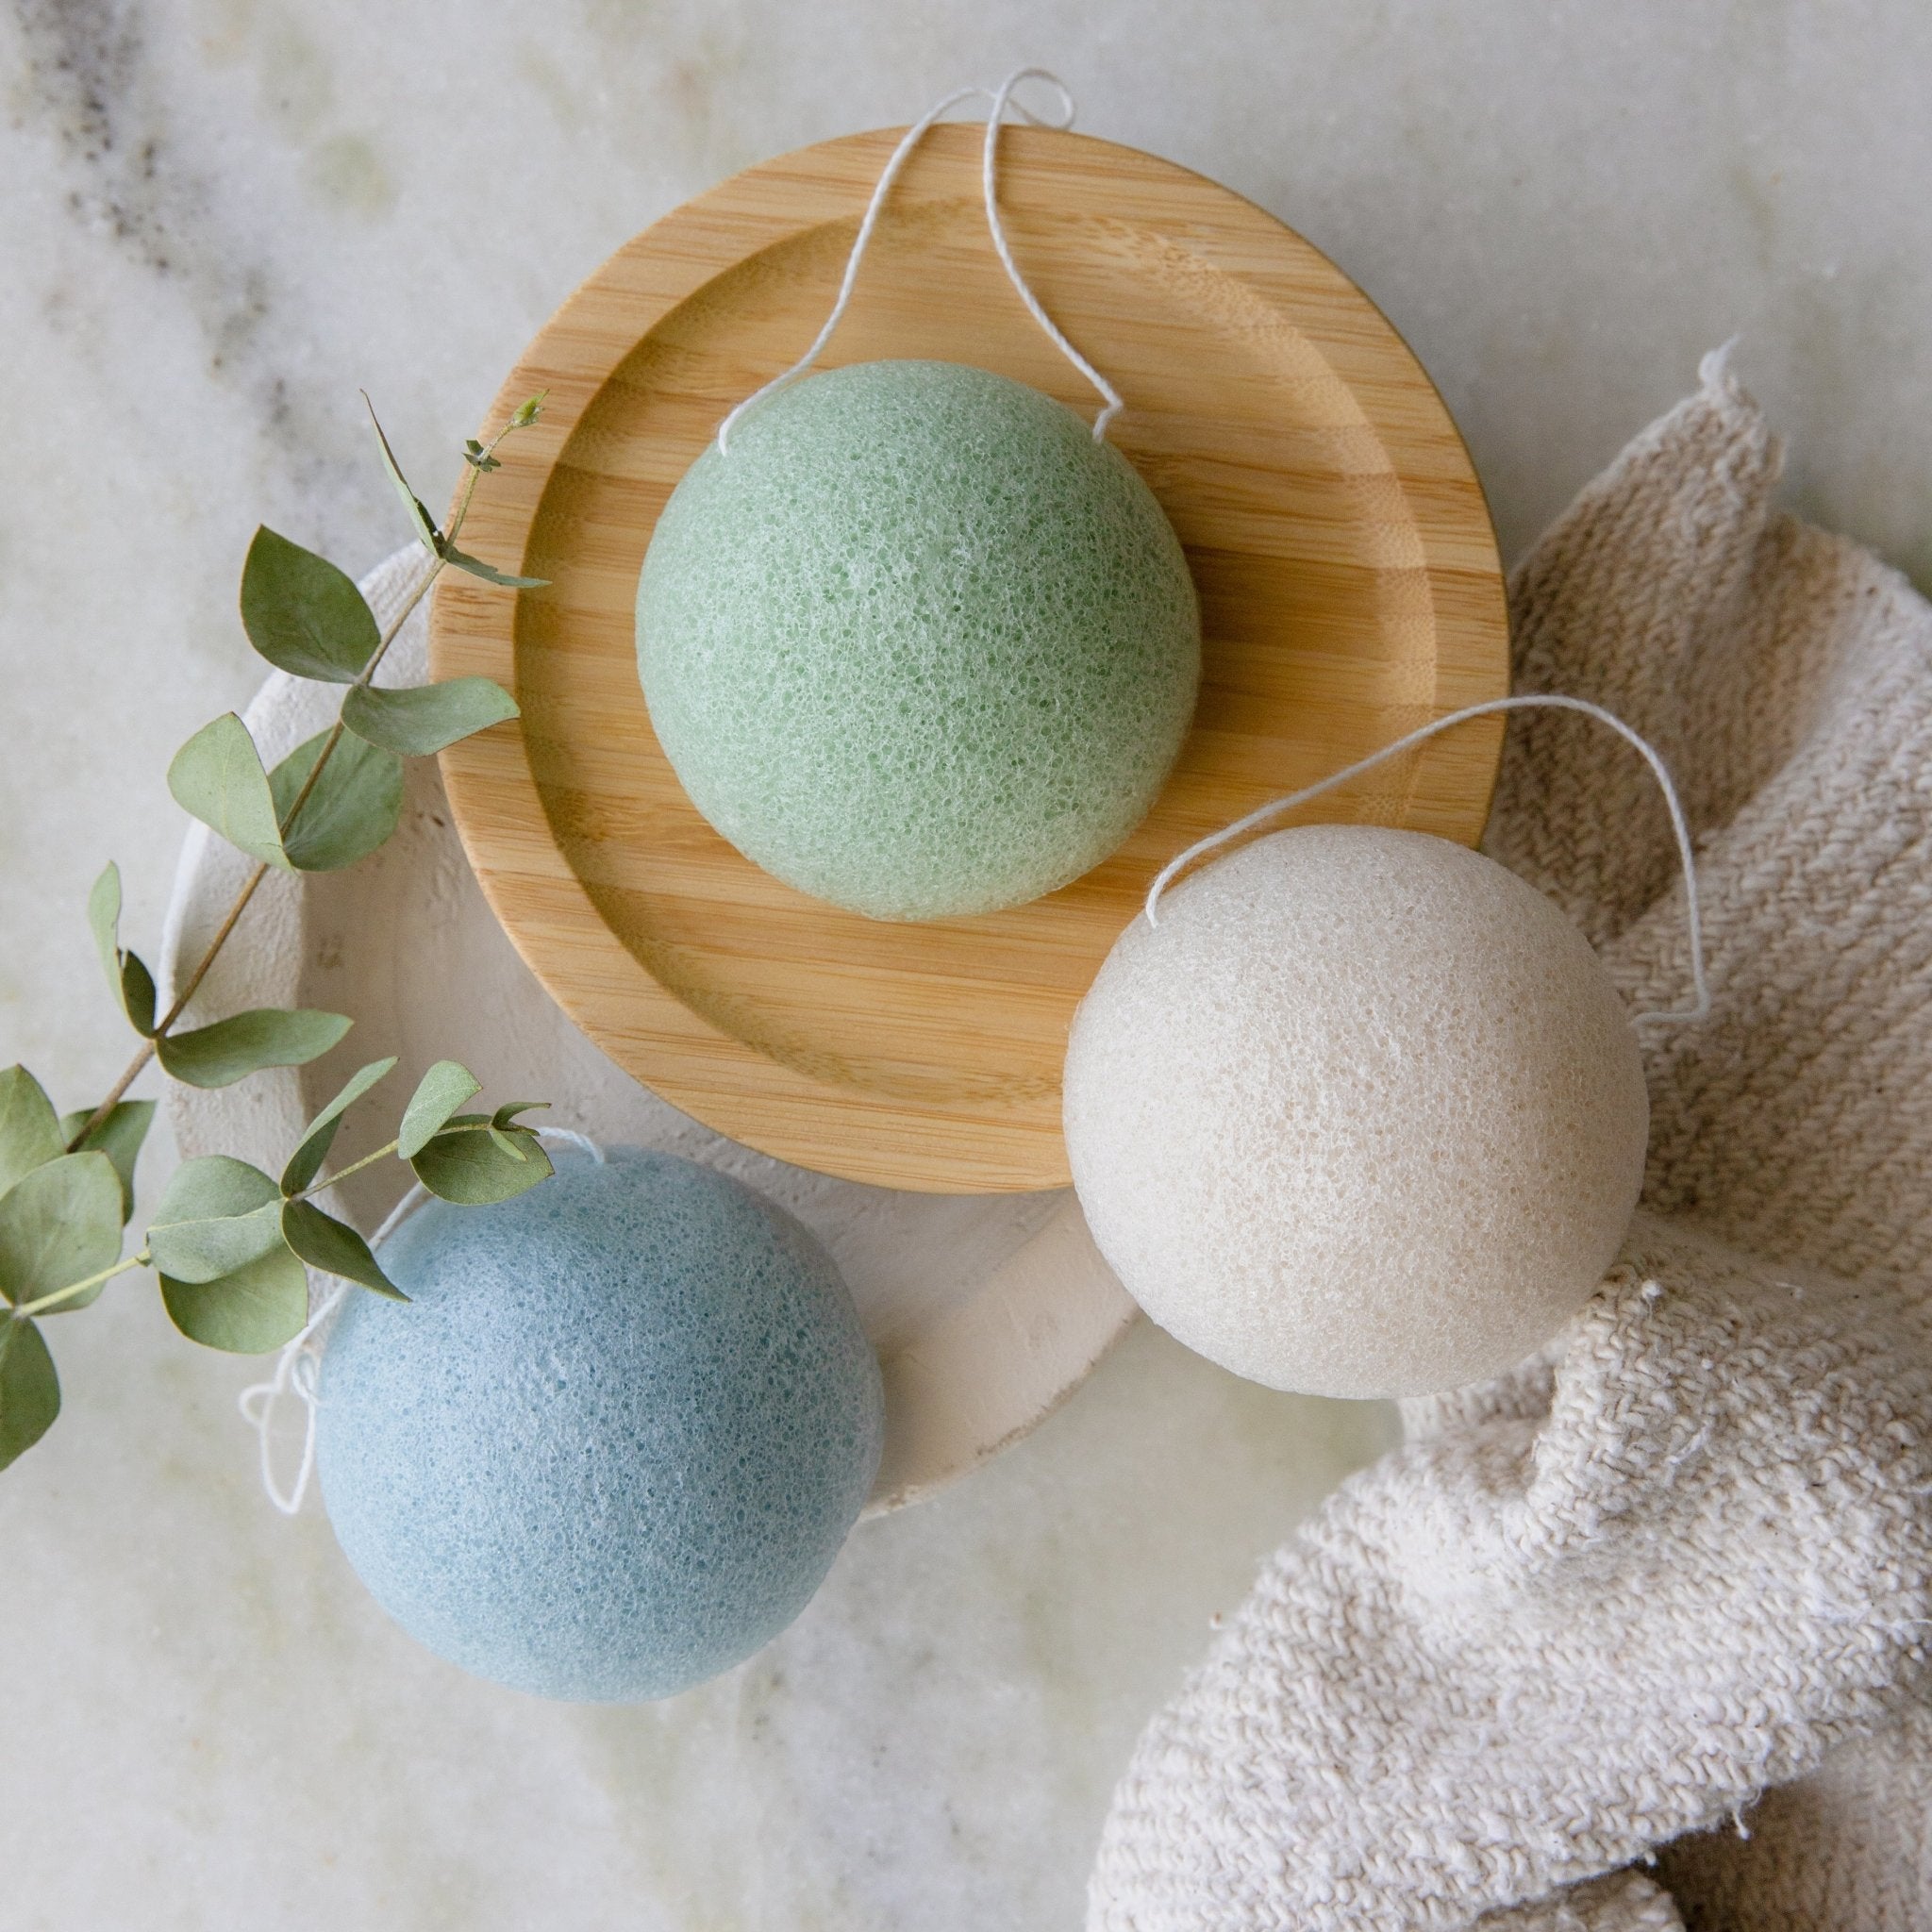 Set of 3 plant-based zero waste Konjac Facial Cleansing Sponges - Earth Ahead